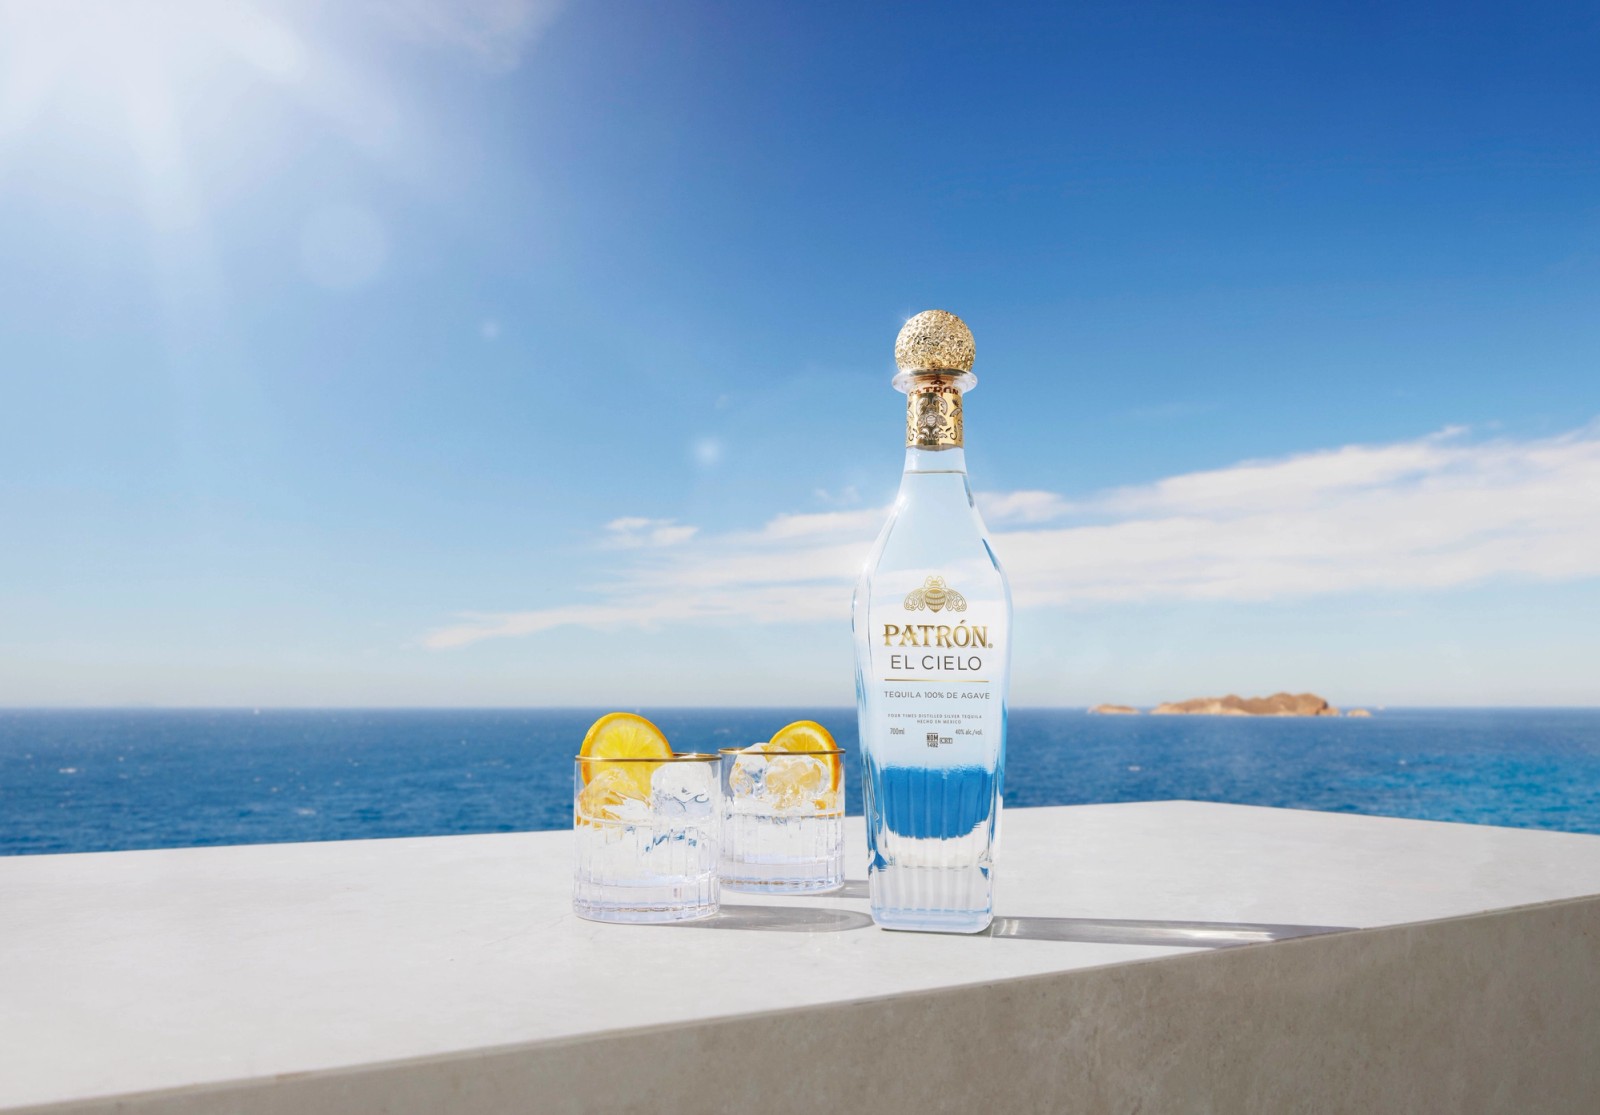 A bottle Patron El Cielo with two serves overlooking a vast seascape in Ibiza, photographed by Jason Bailey